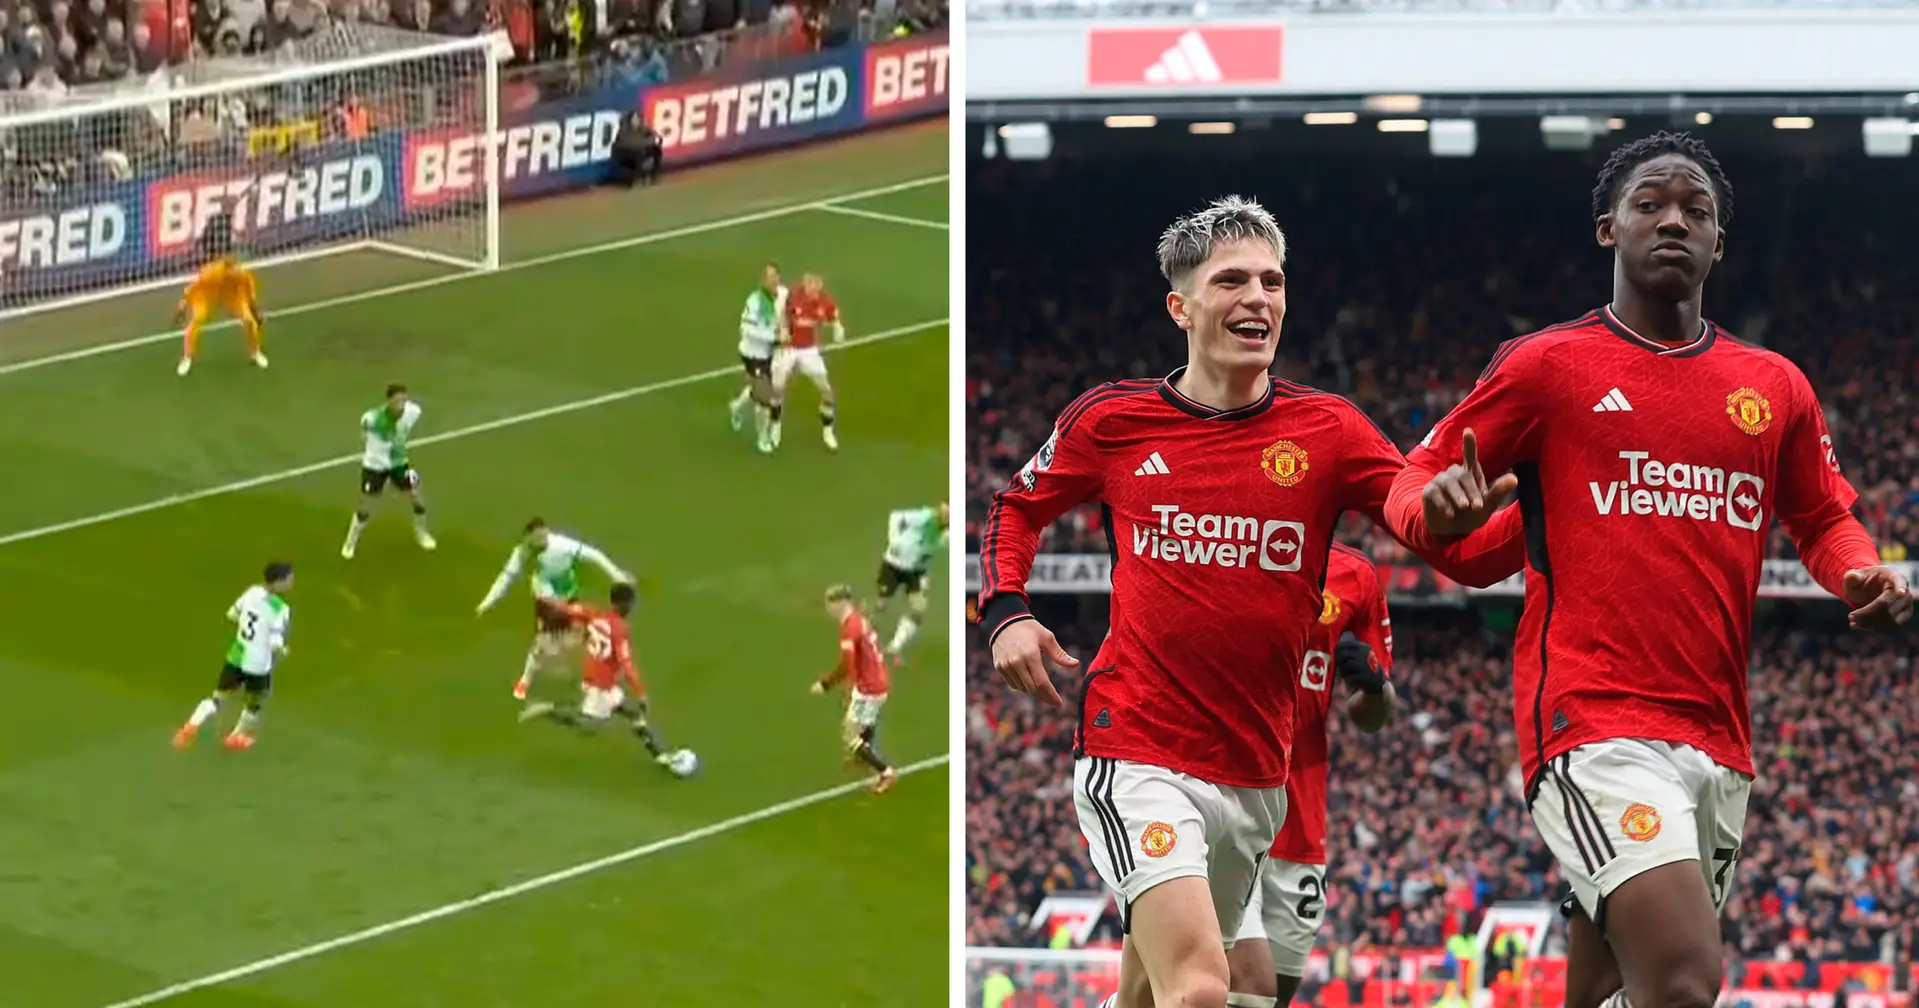 'The team should be built around him': Man United fans react to a fantastic Mainoo screamer